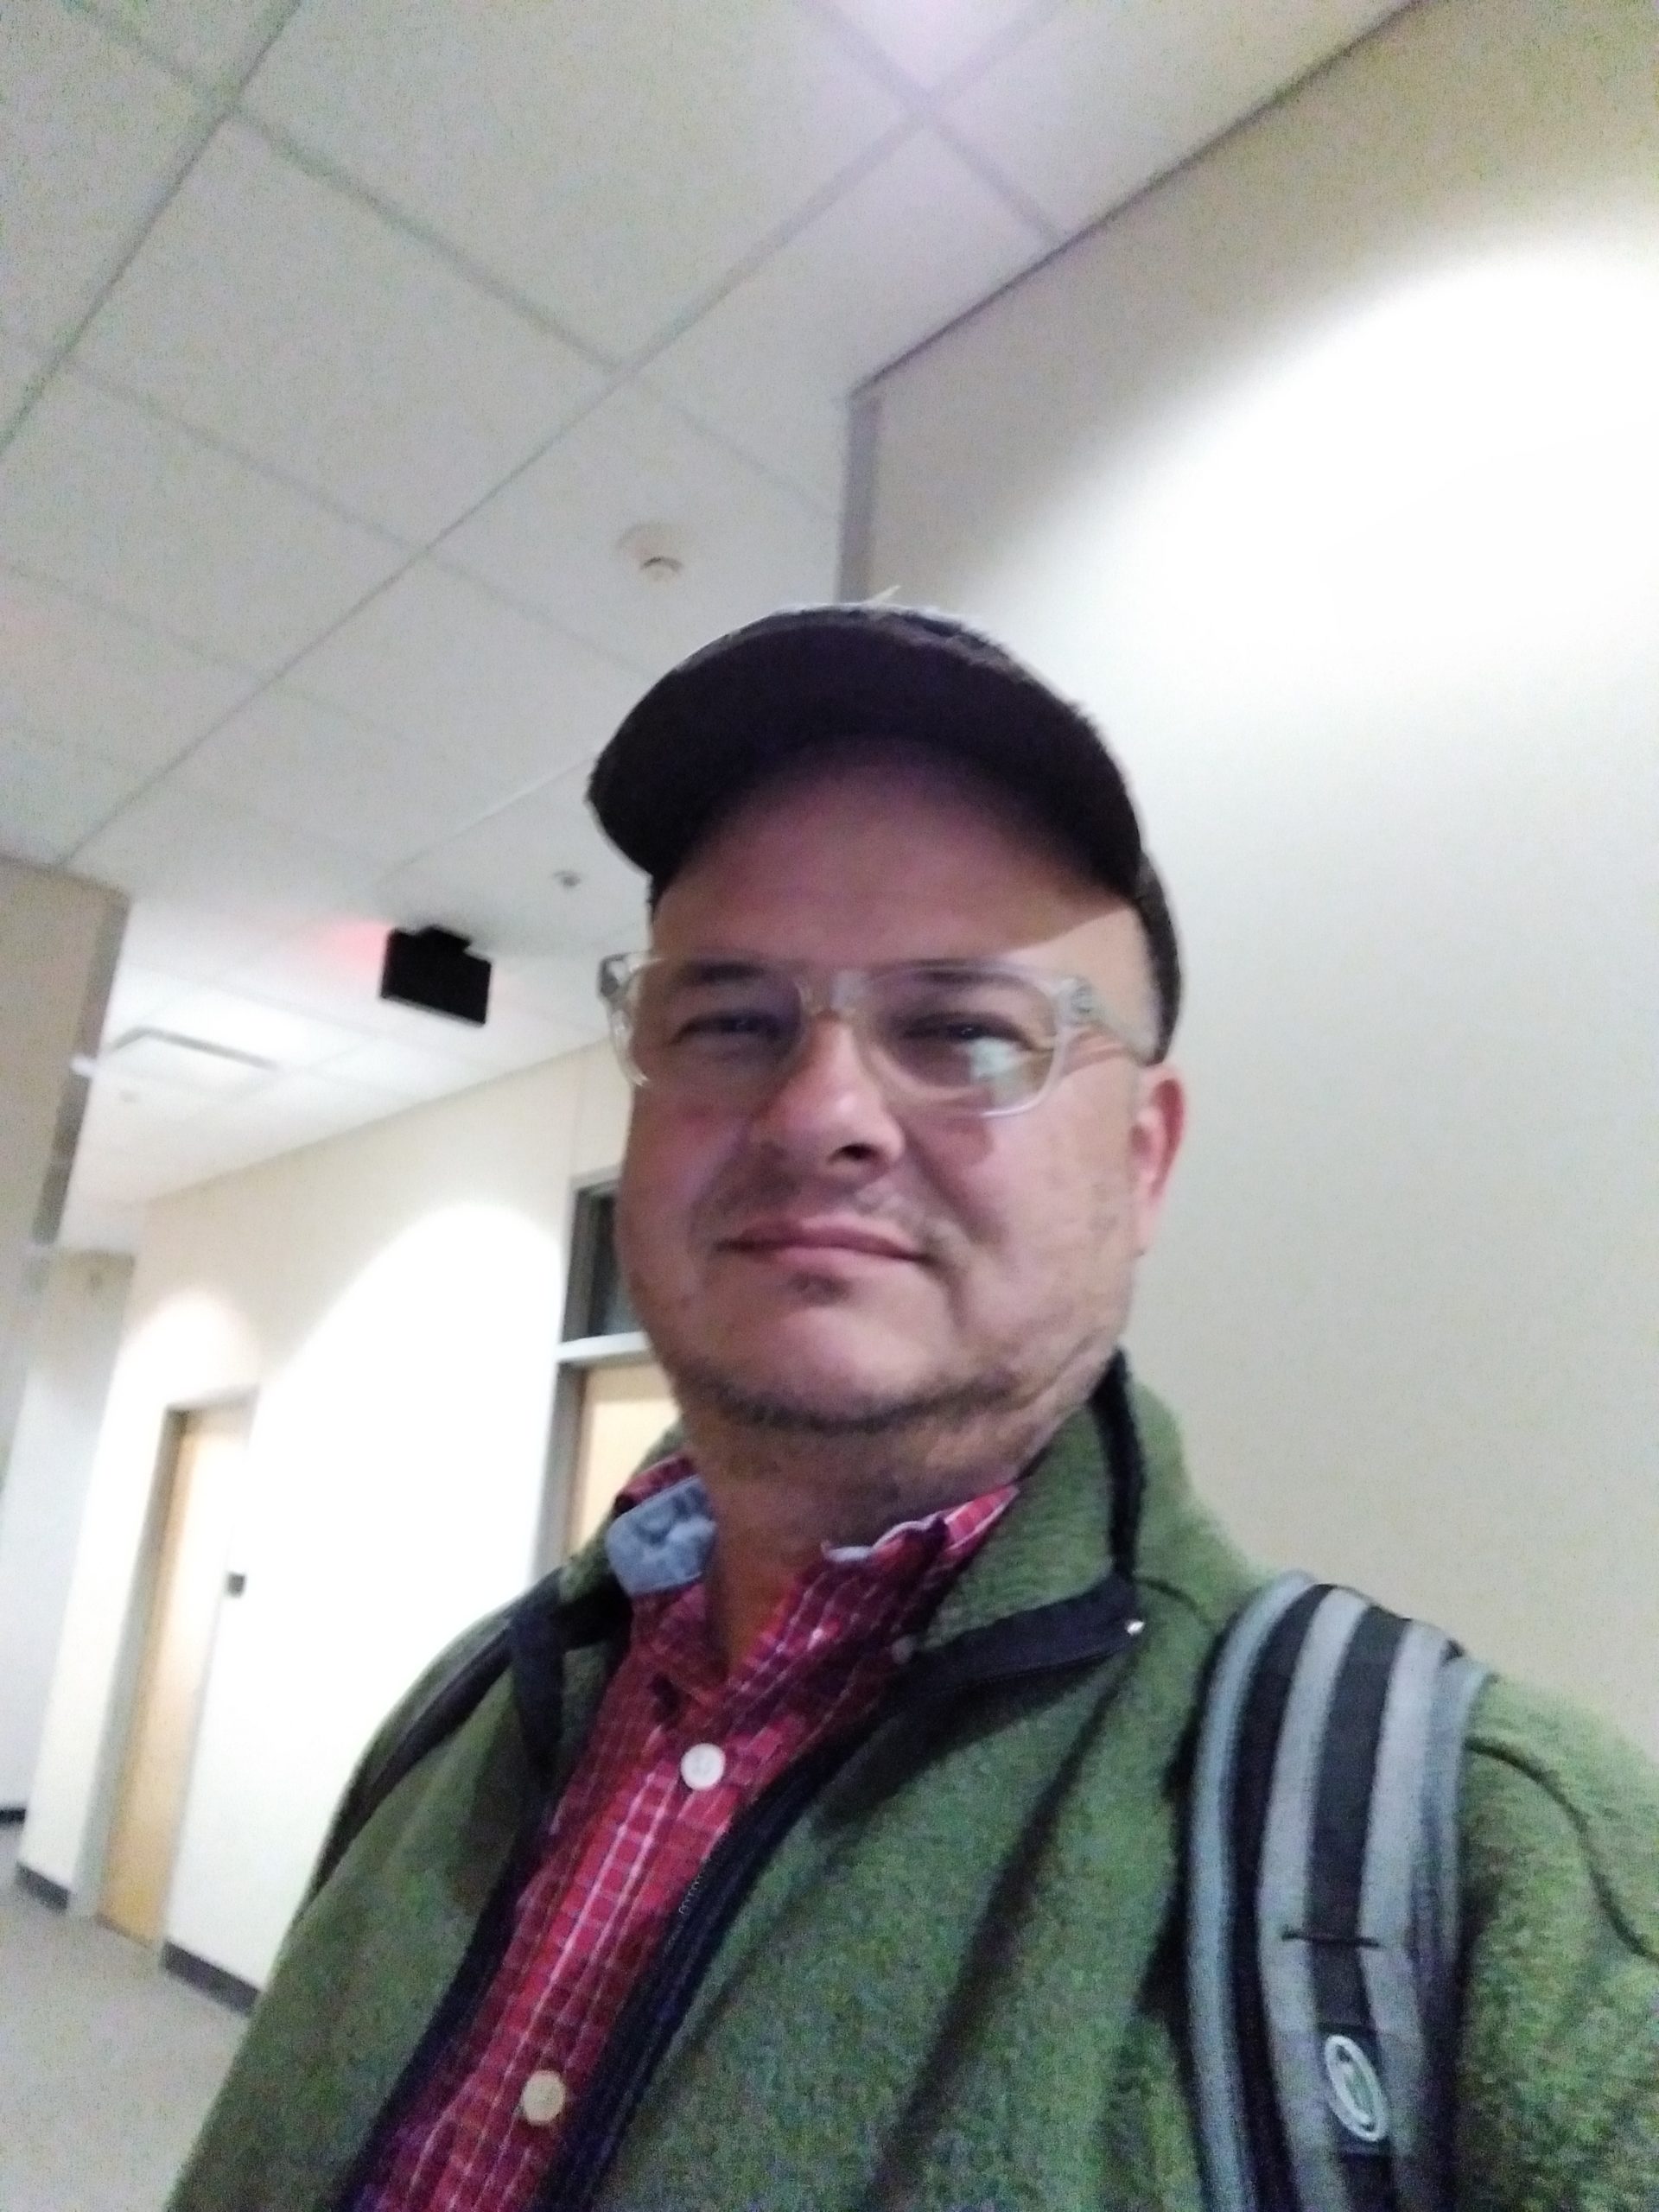 In this photo I'm wearing a green fleece jacket, a backpack, a red-checked collared shirt, clear-framed eyeglasses, and a well-worn baseball cap. In the background is the hallway with its beige-painted walls.